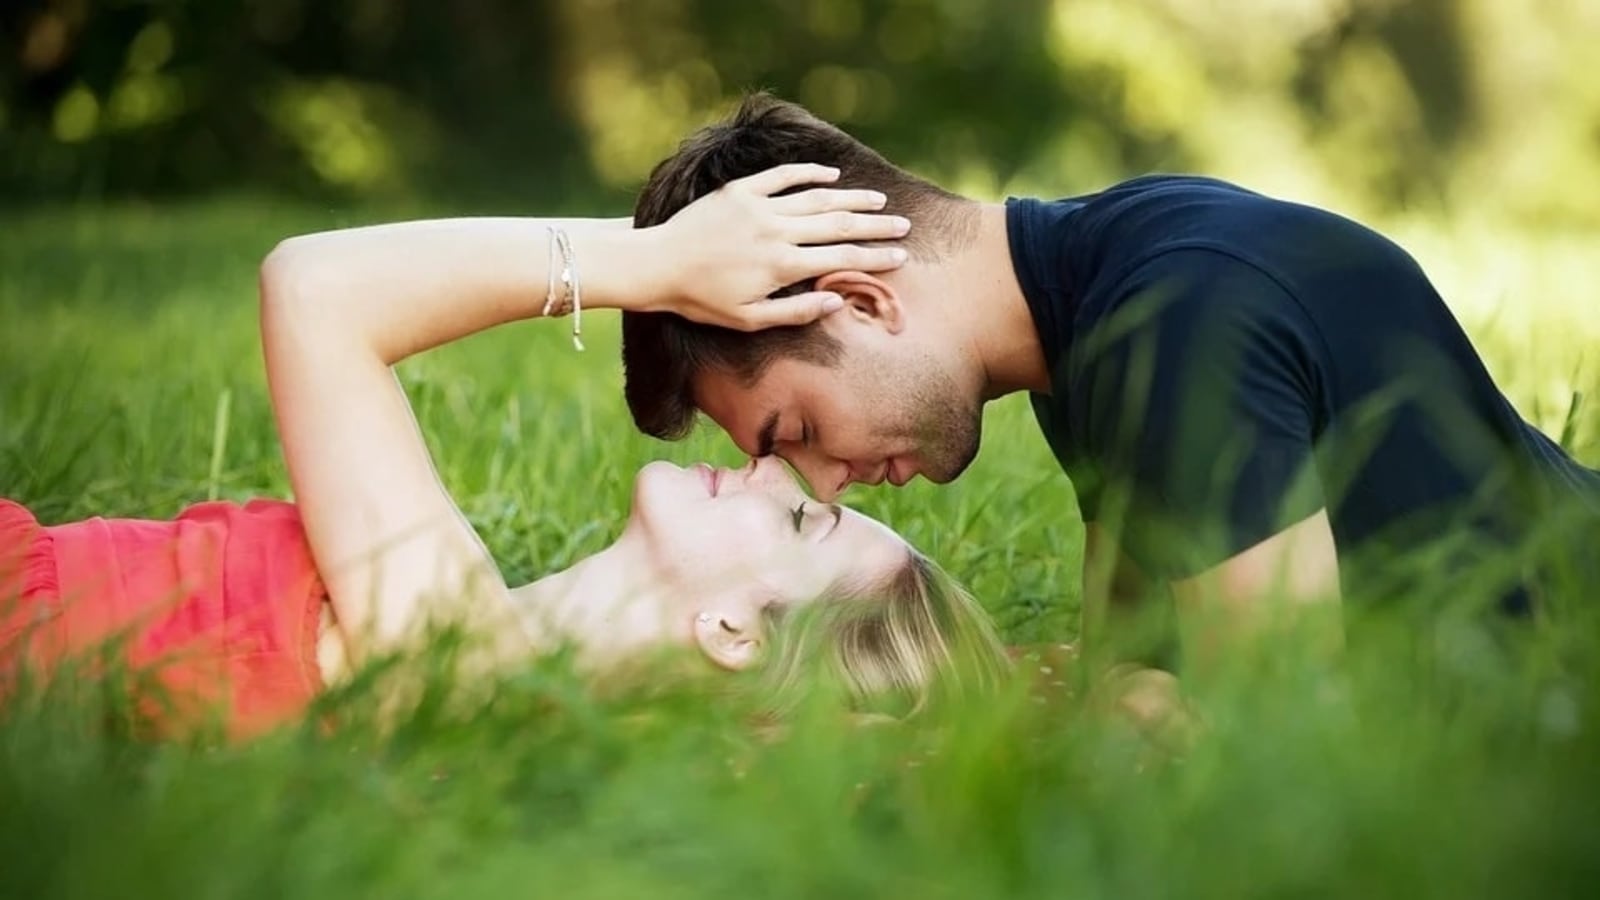 Experts say falling in love is great but watch your heart | Health ...